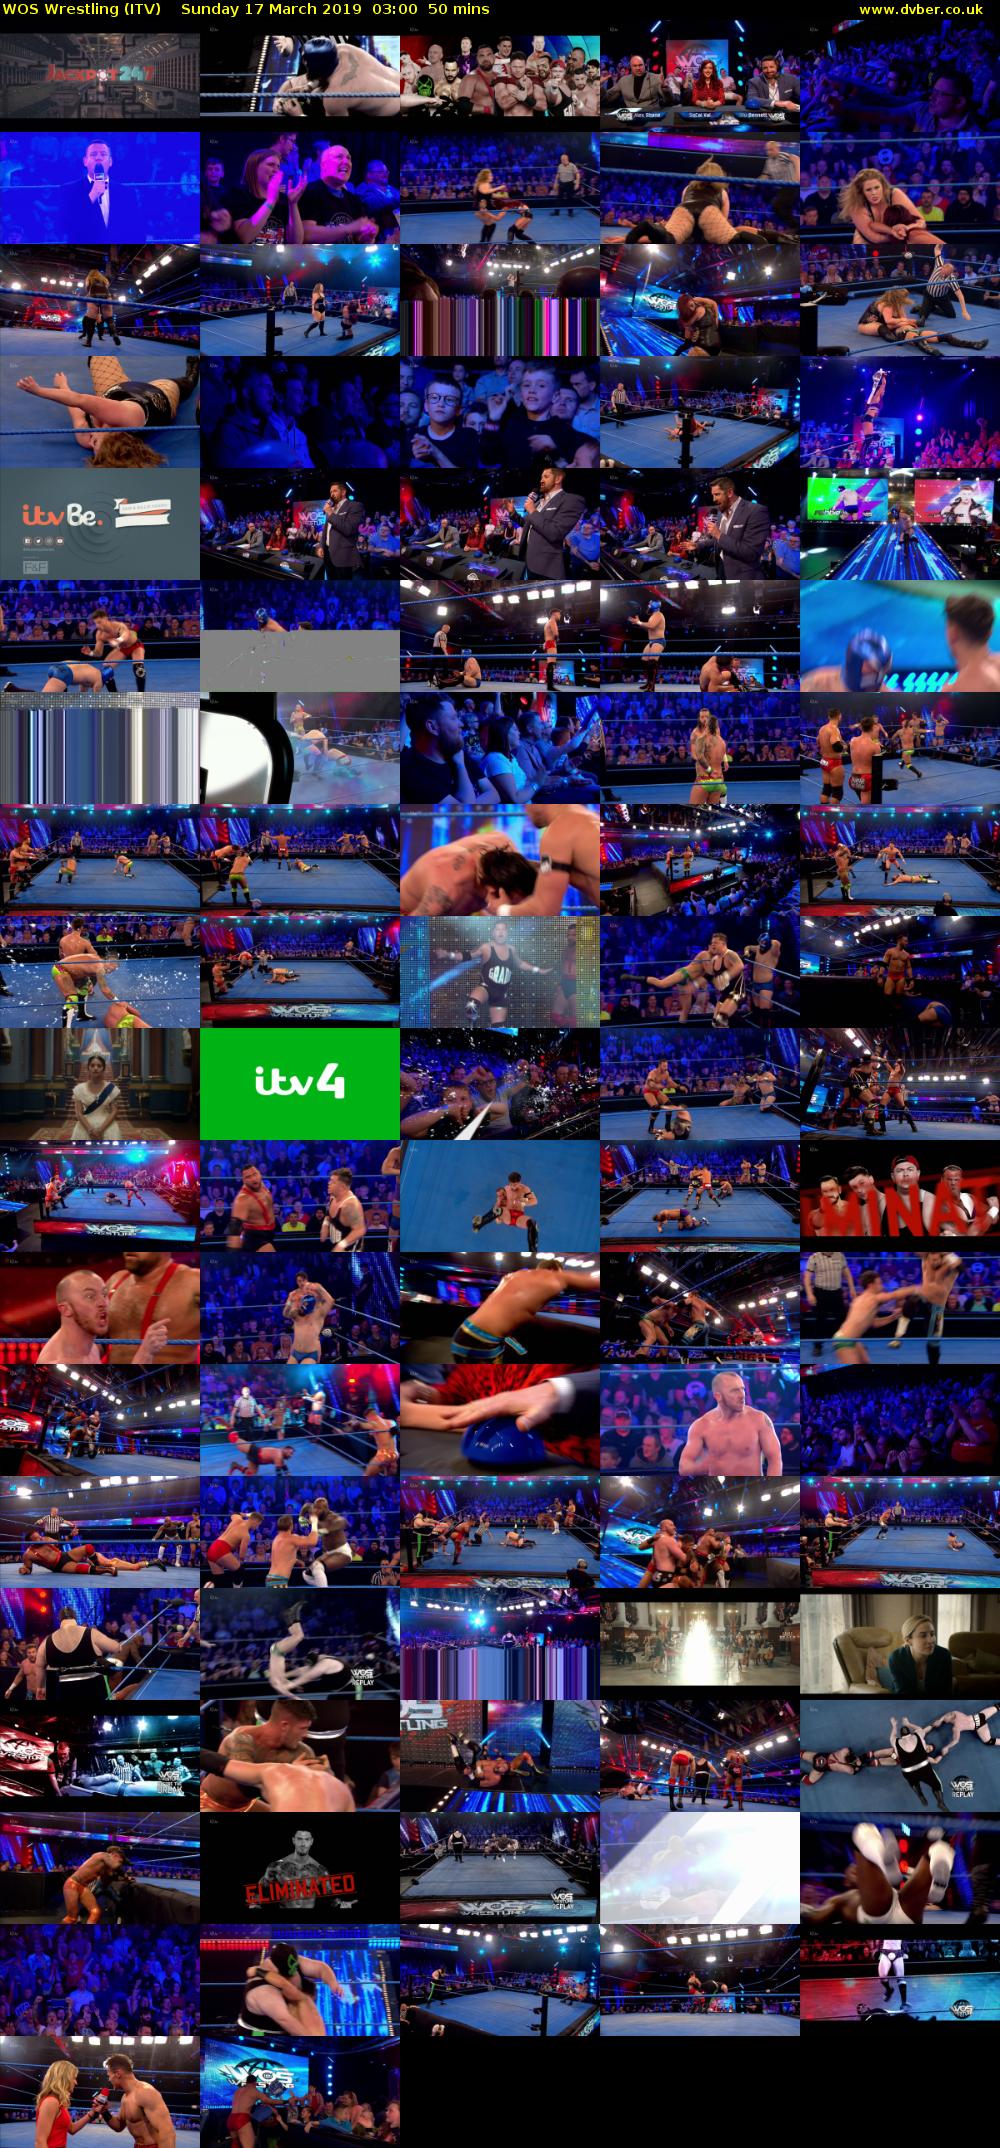 WOS Wrestling (ITV) Sunday 17 March 2019 03:00 - 03:50